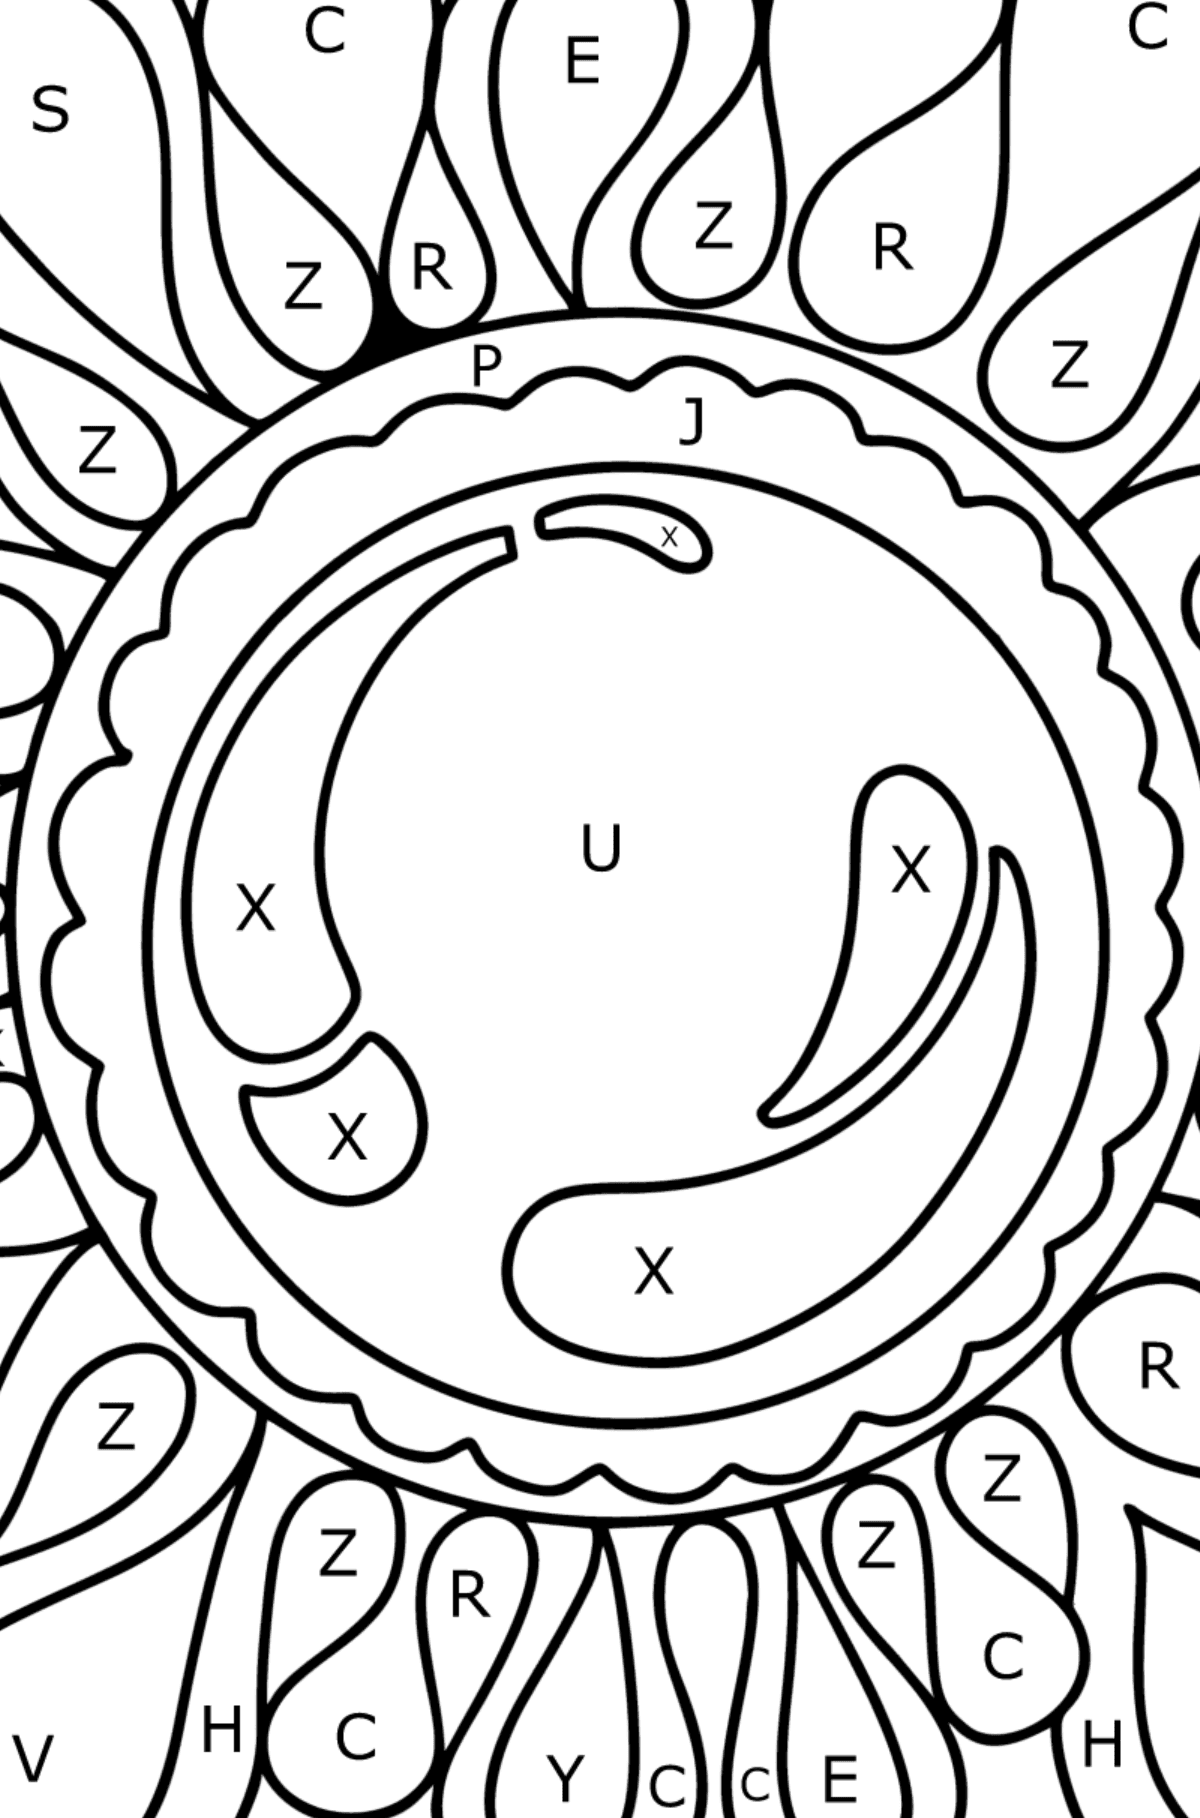 Zentangle Mirror coloring page - Coloring by Letters for Kids